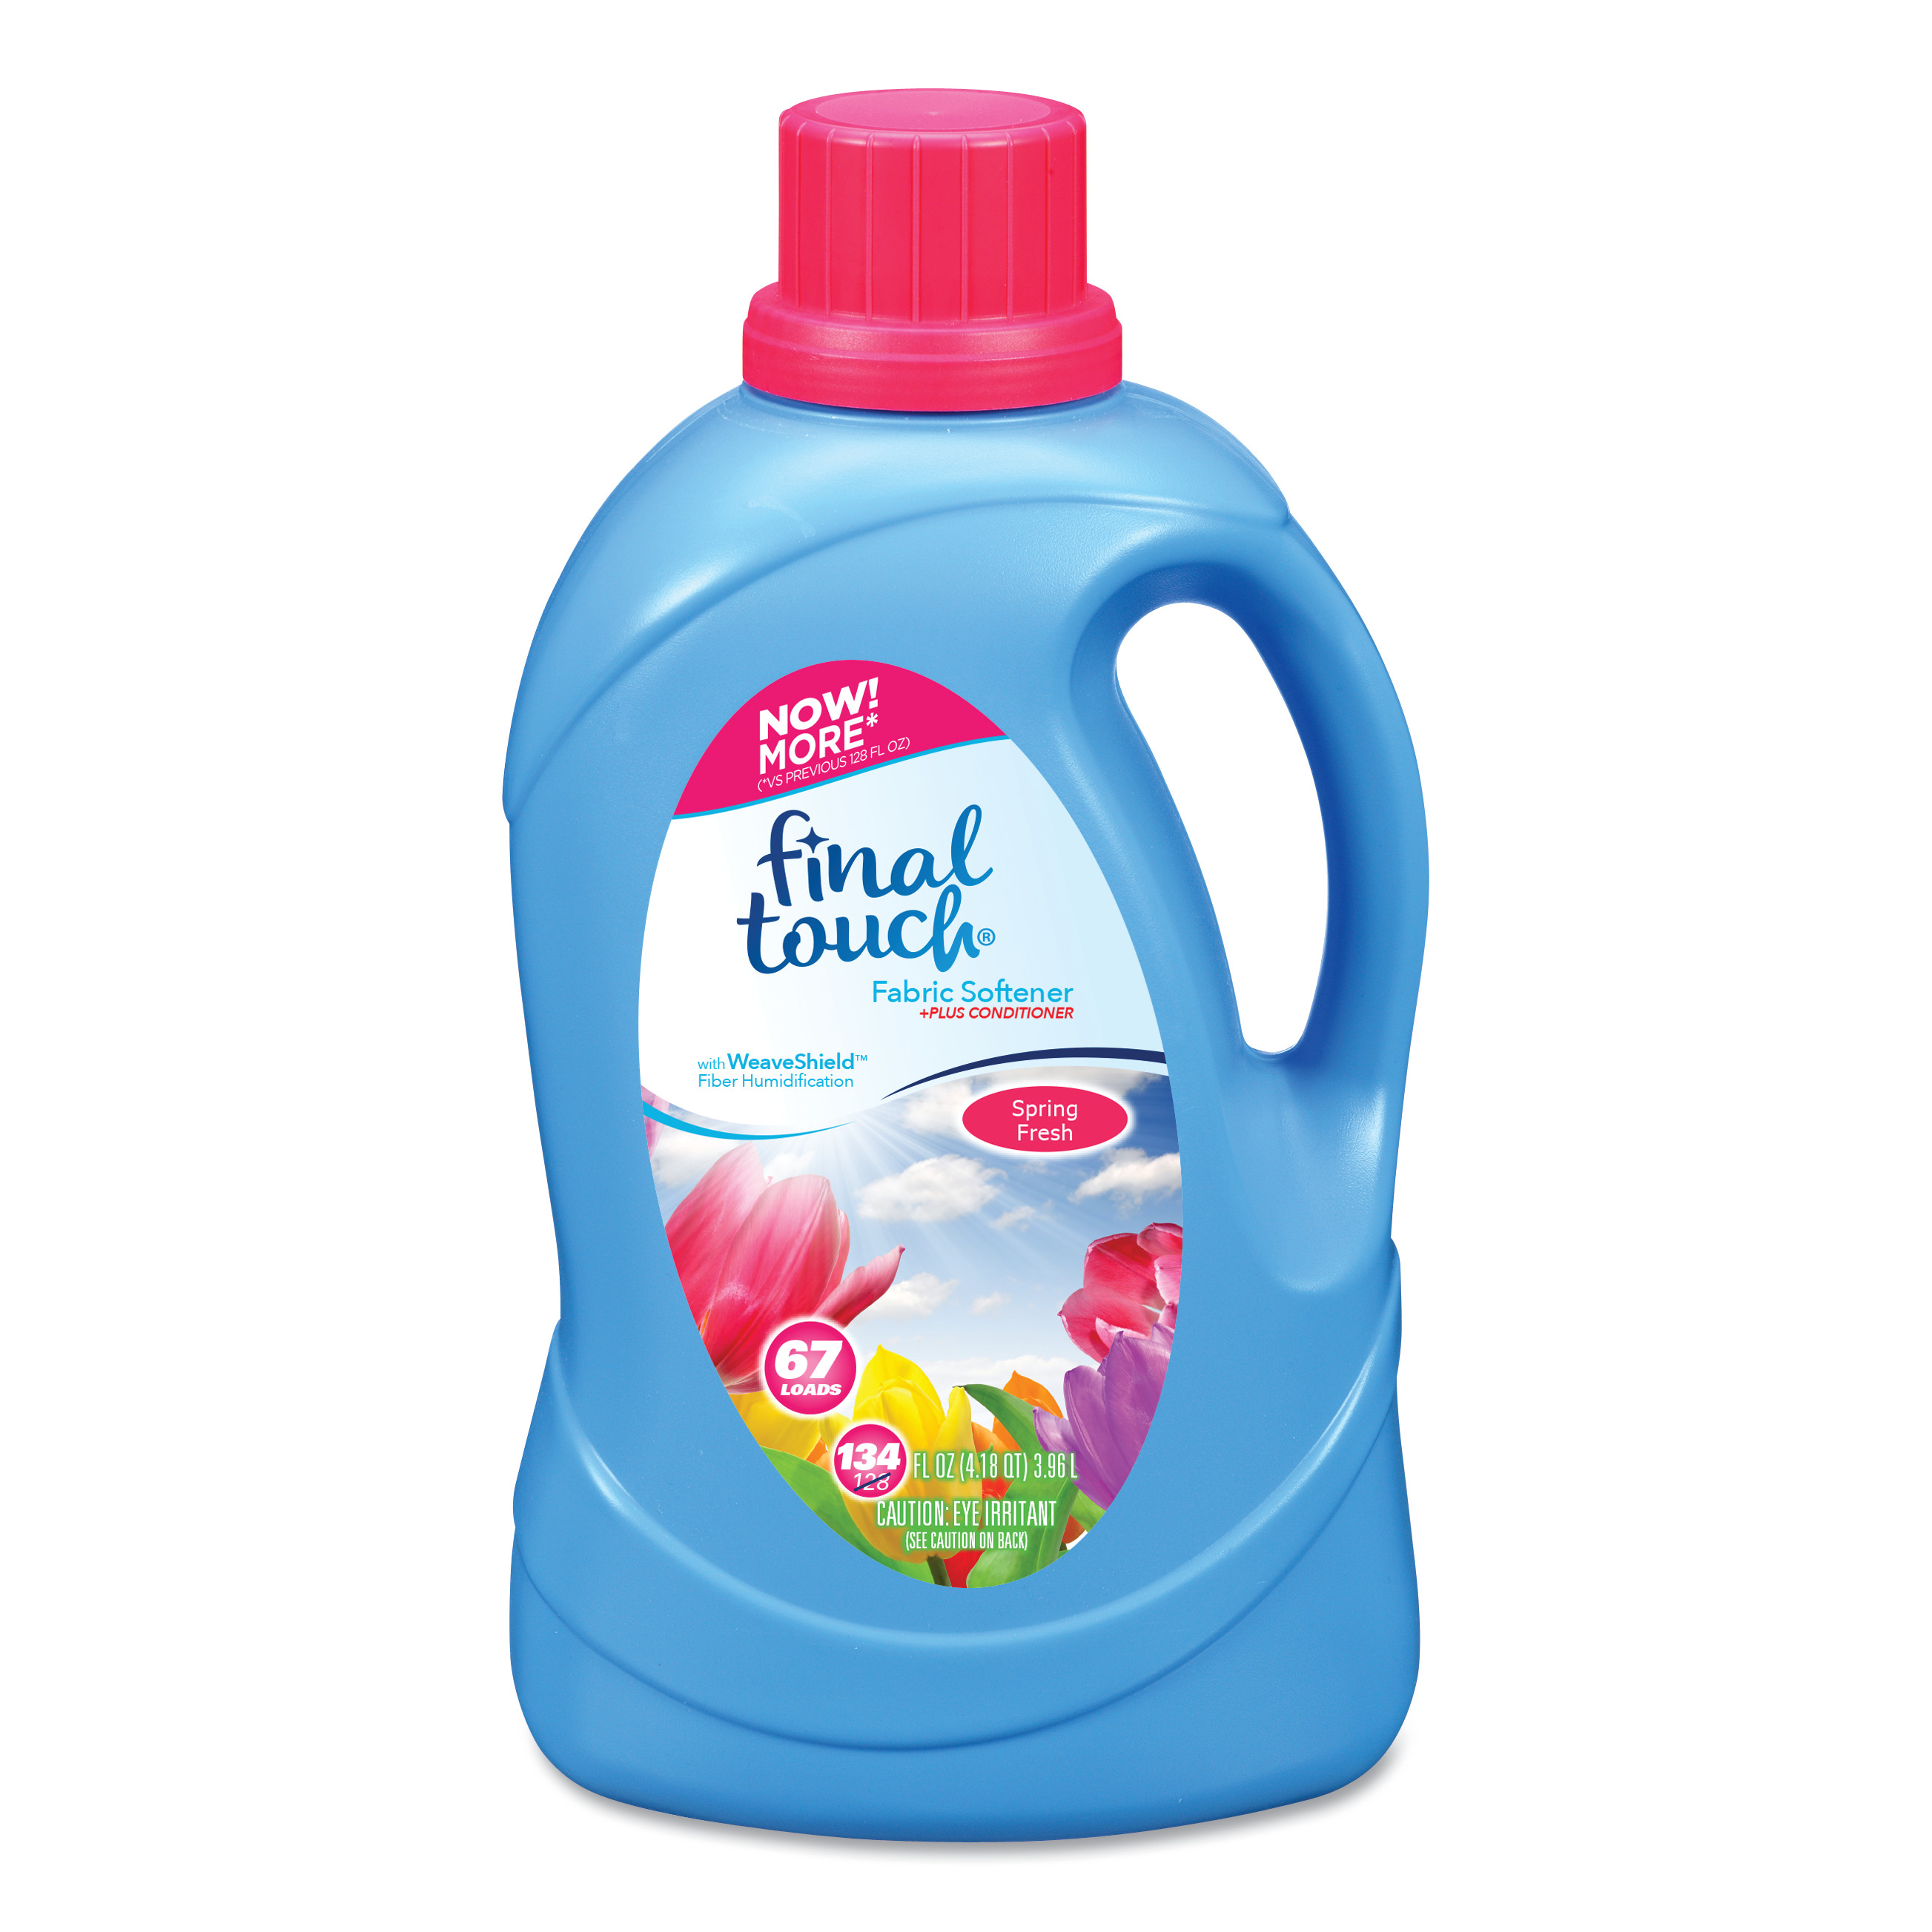  Final Touch FINTO37 Scented Fabric Softener, Spring Fresh, 134 oz Bottle, 4/Carton (PBCFINTO37) 